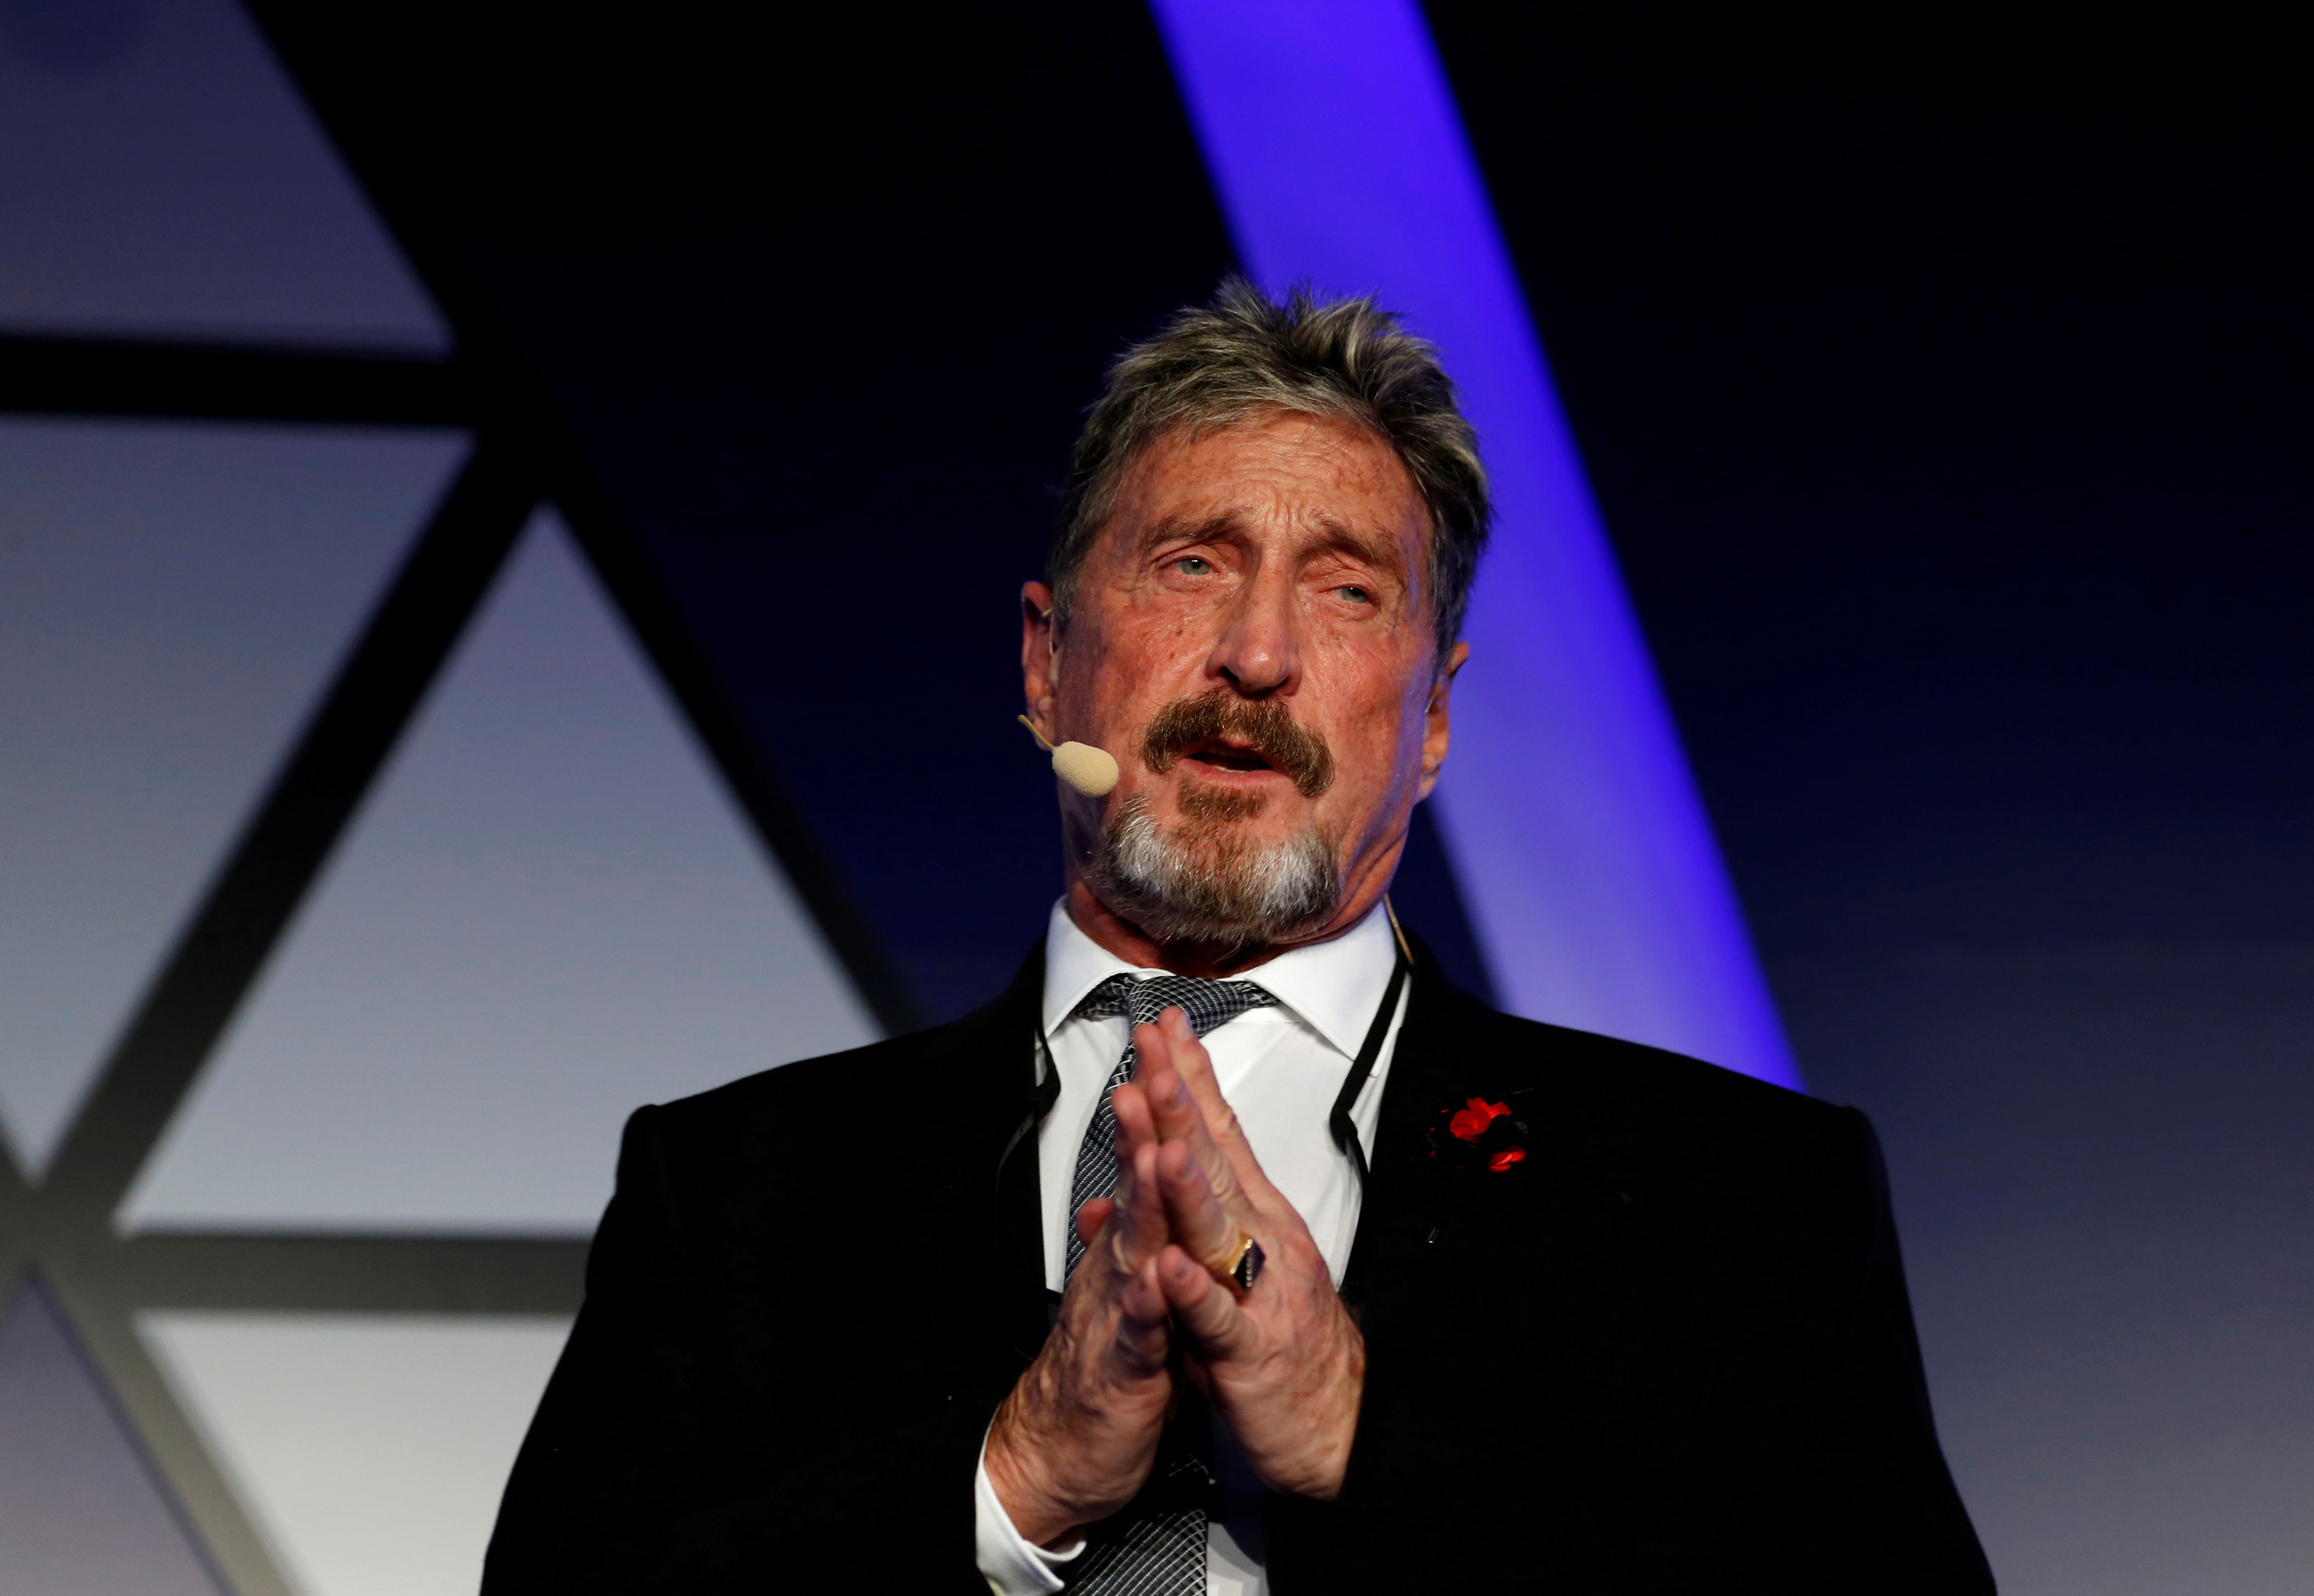 John McAfee, founder of McAfee Antivirus software company, speaks at an industry summit in 2018 (REUTERS/Darrin Zammit Lupi/File Photo)